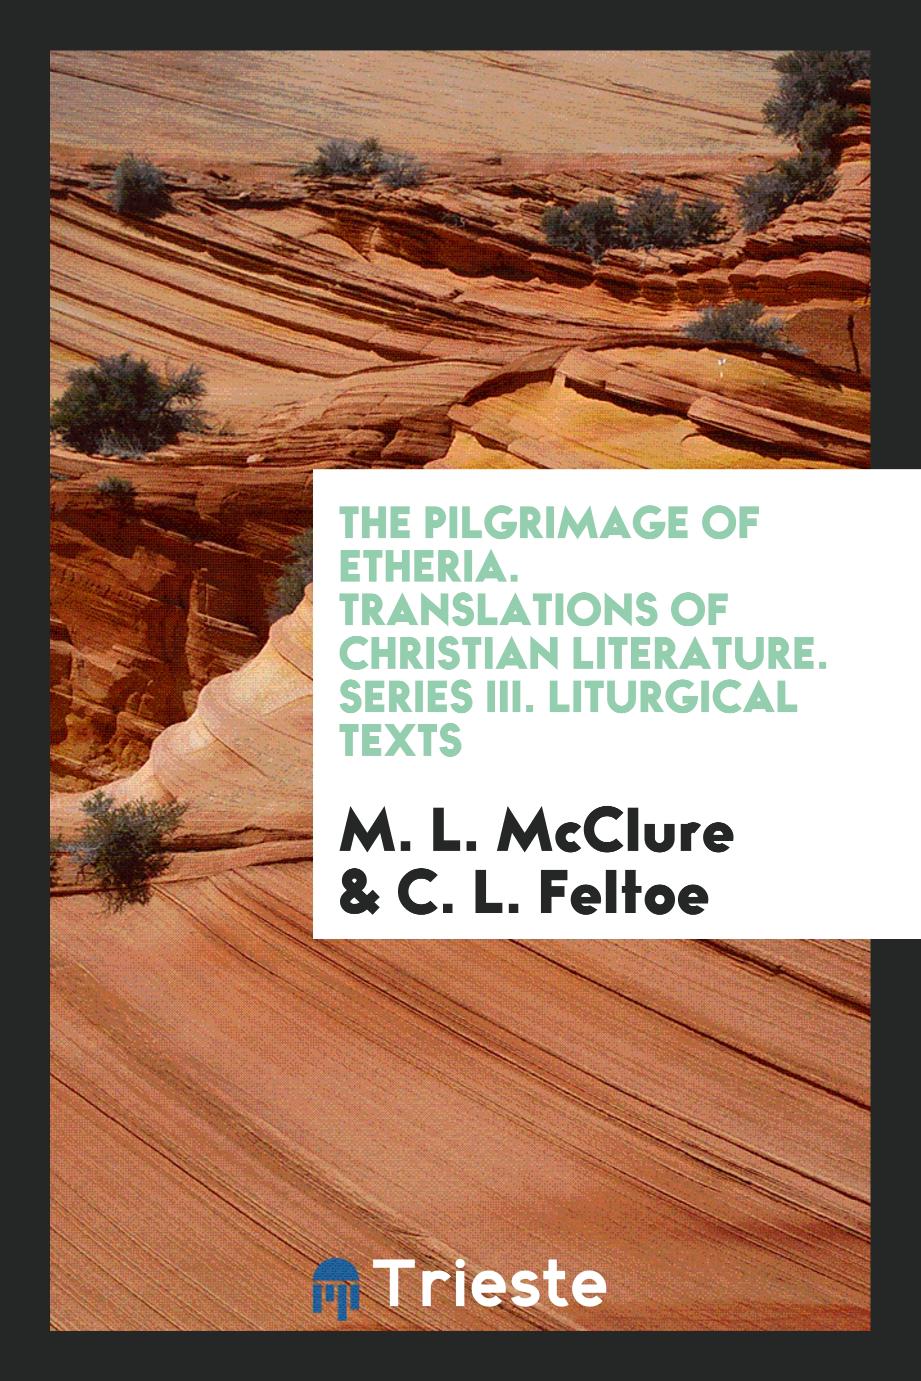 The pilgrimage of Etheria. Translations of christian literature. Series III. Liturgical texts